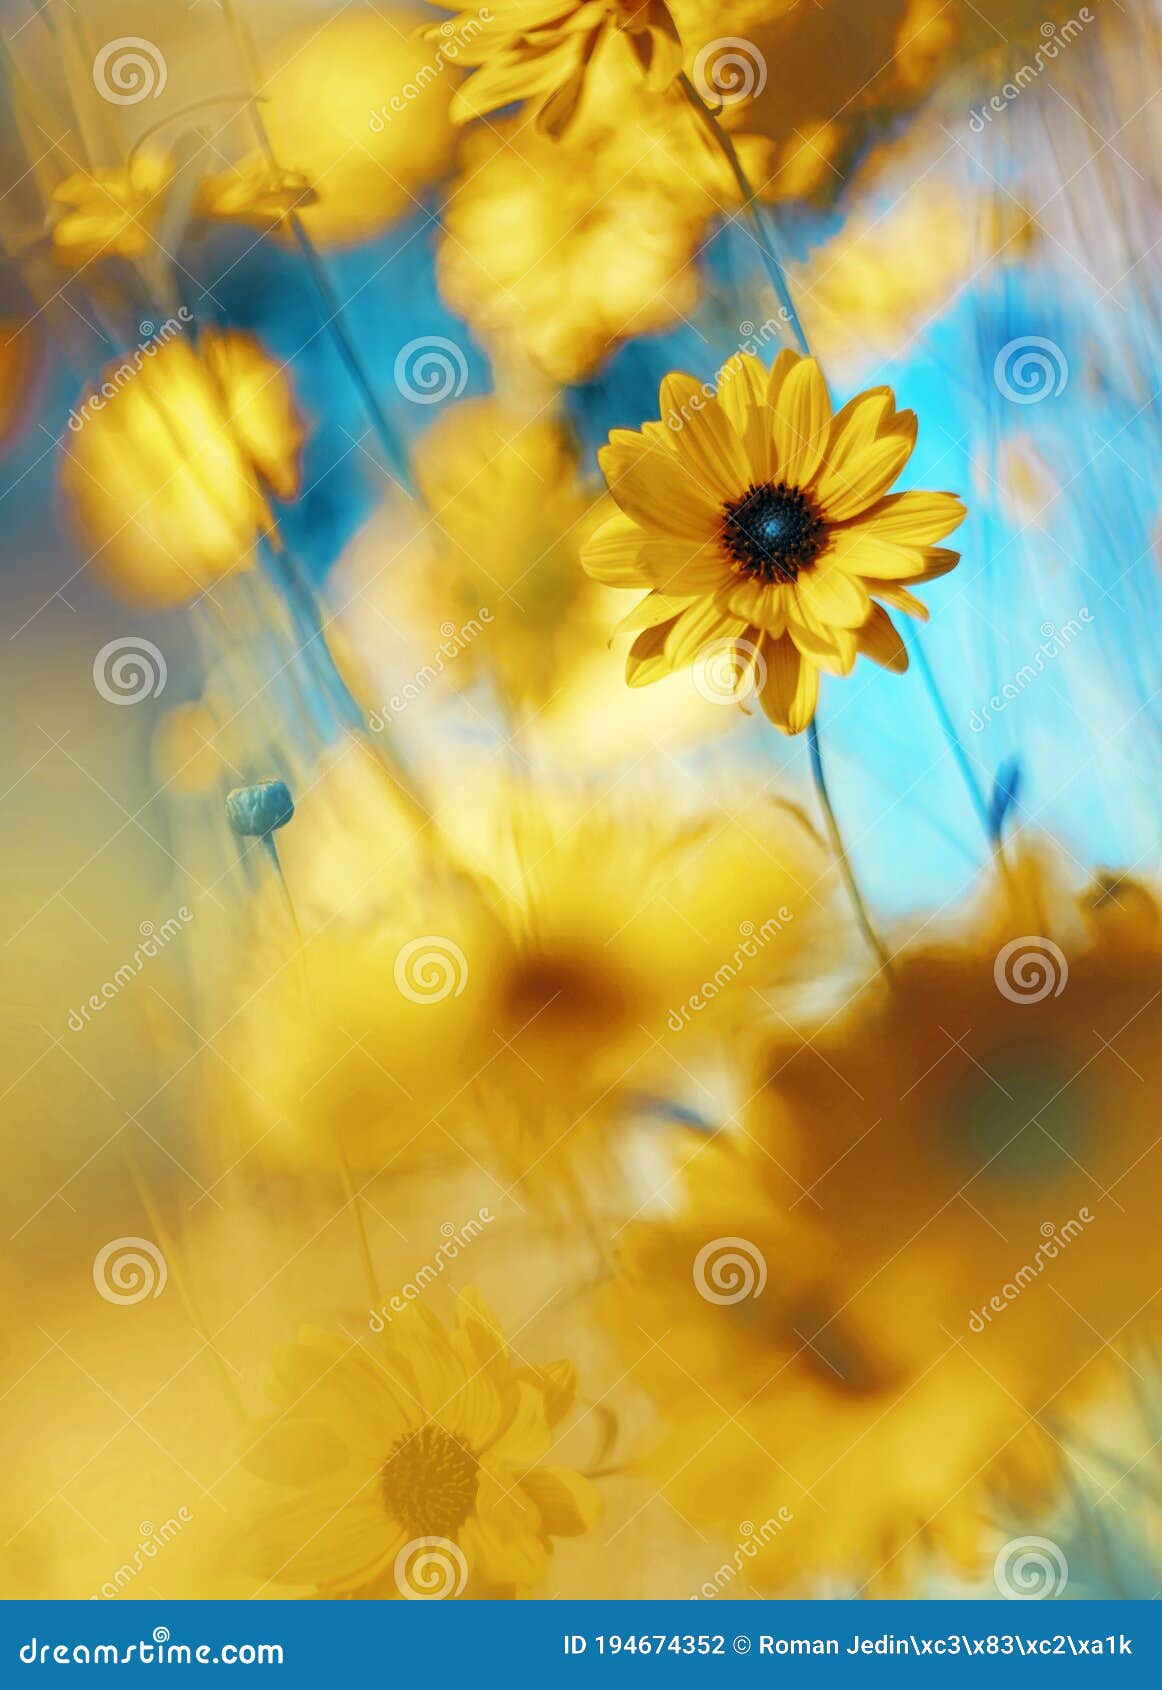 sunflower - impresion of colors